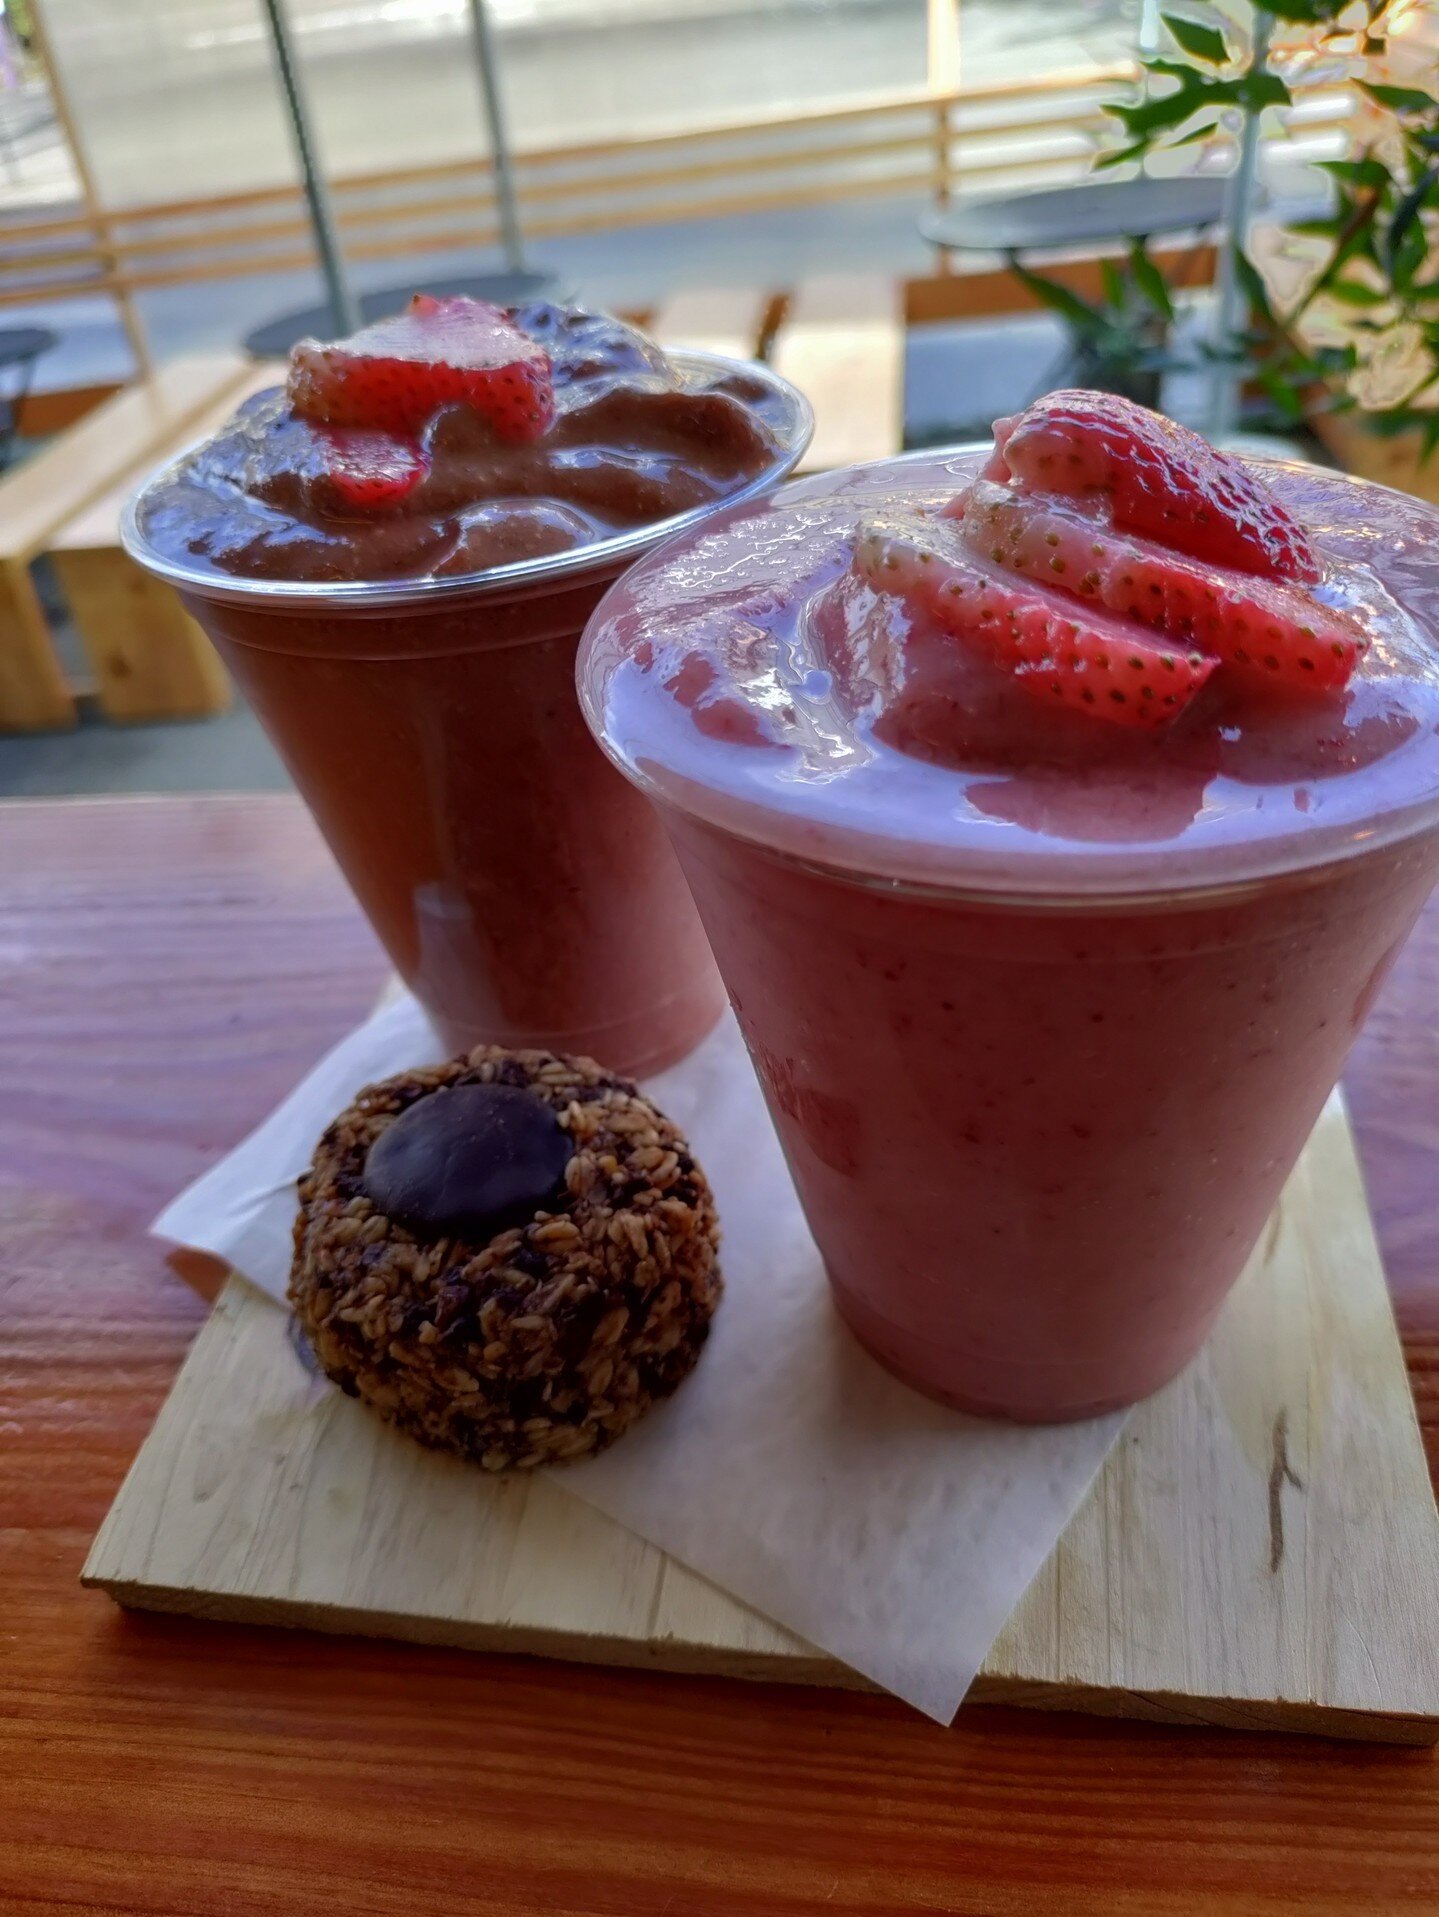 Treat yourself and your Valentine to a little self-care this Valentine&rsquo;s Day with organic Strawberry Cacao Smoothies and Raw Vegan Gluten-Free Trail Cookies that are also available @caffevinoolio Show your body and soul some love with a delicio